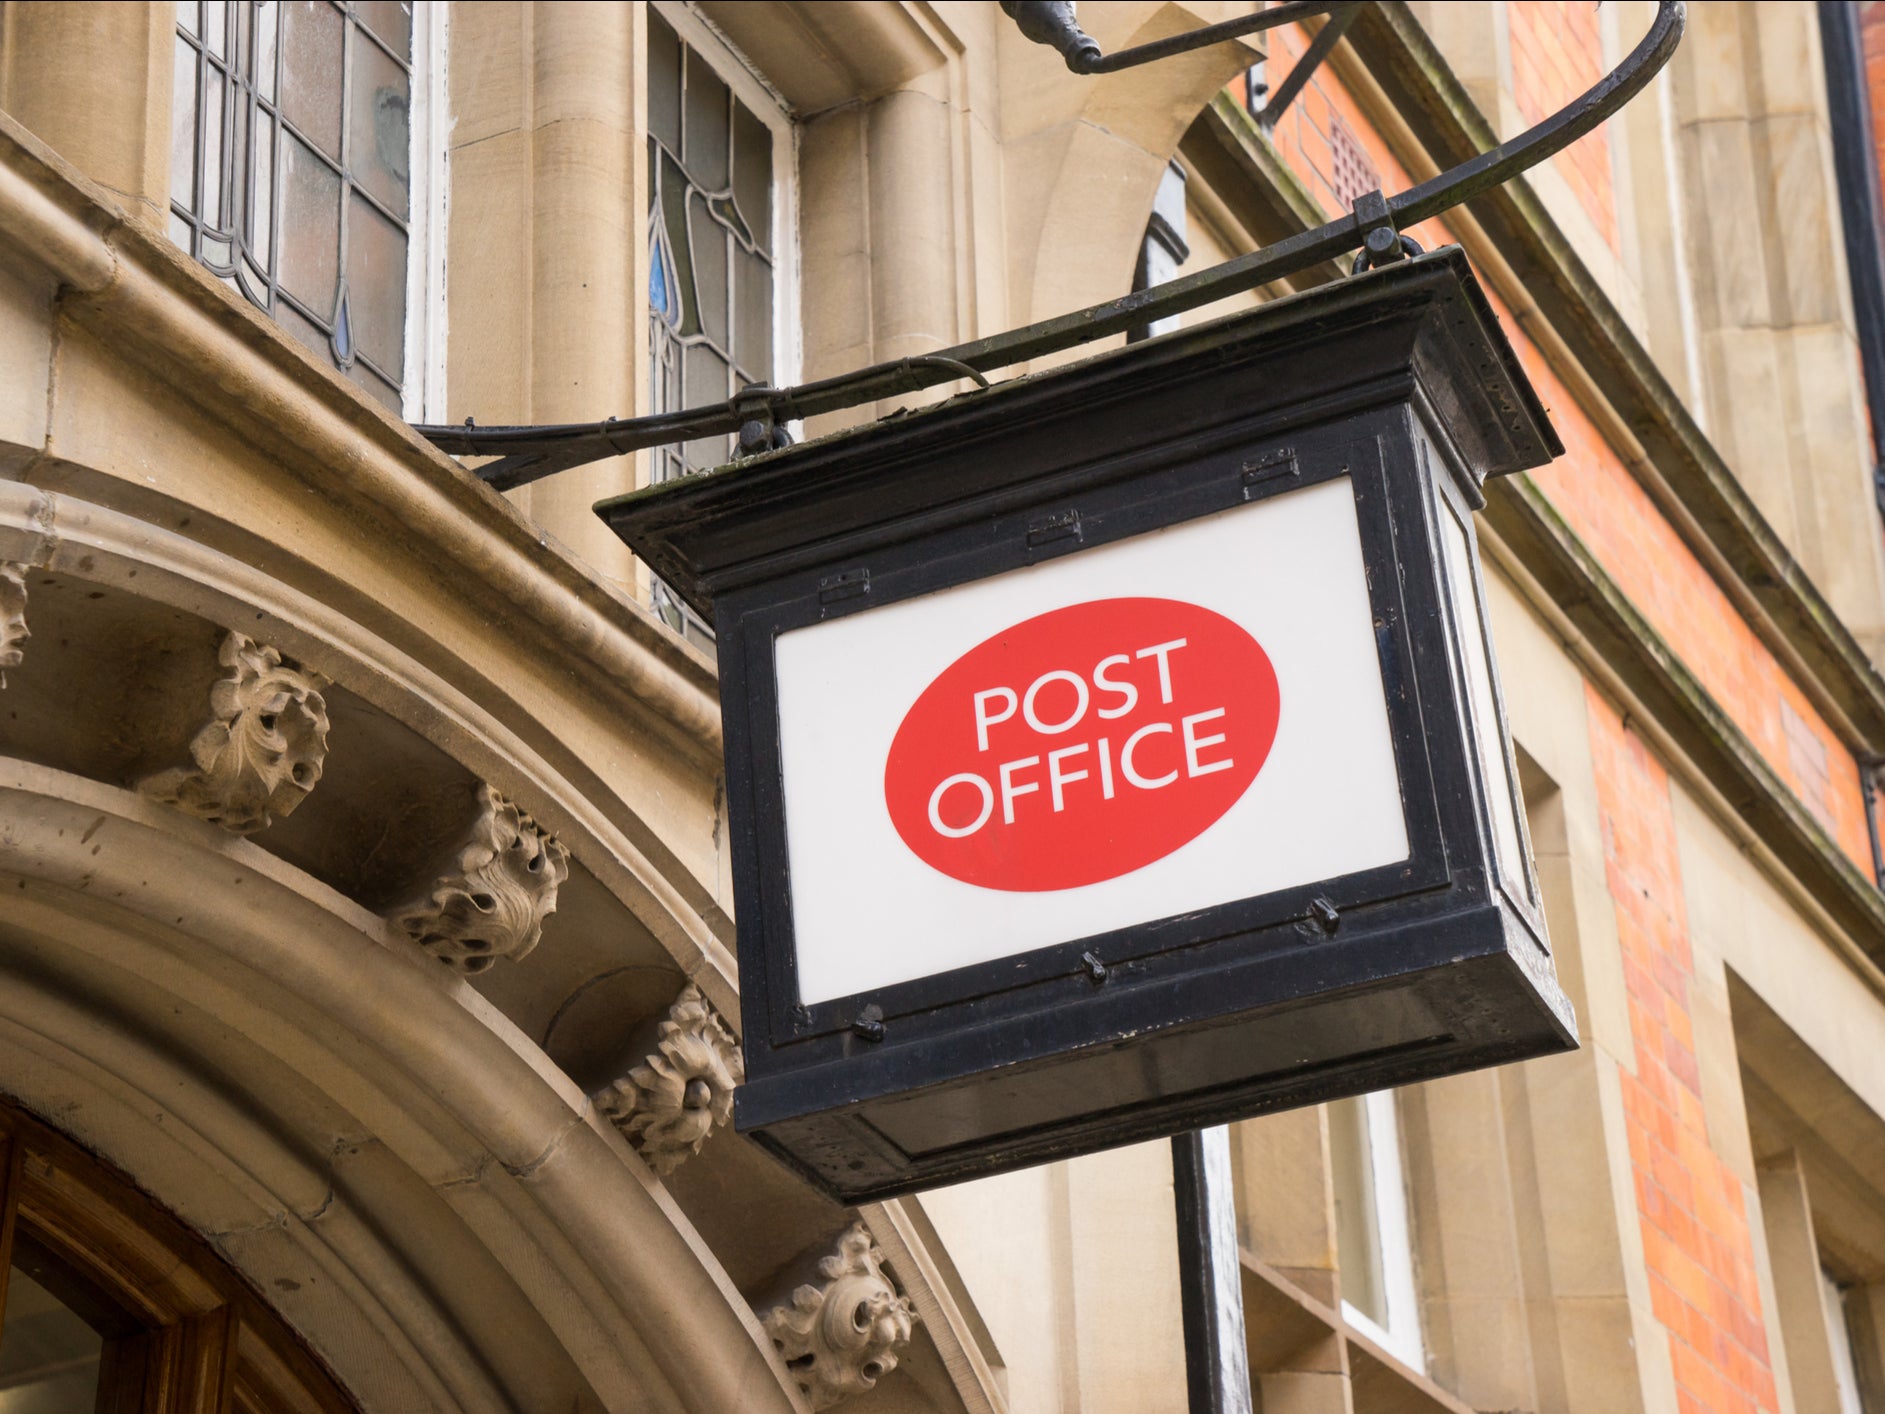 A Post Office sign in England